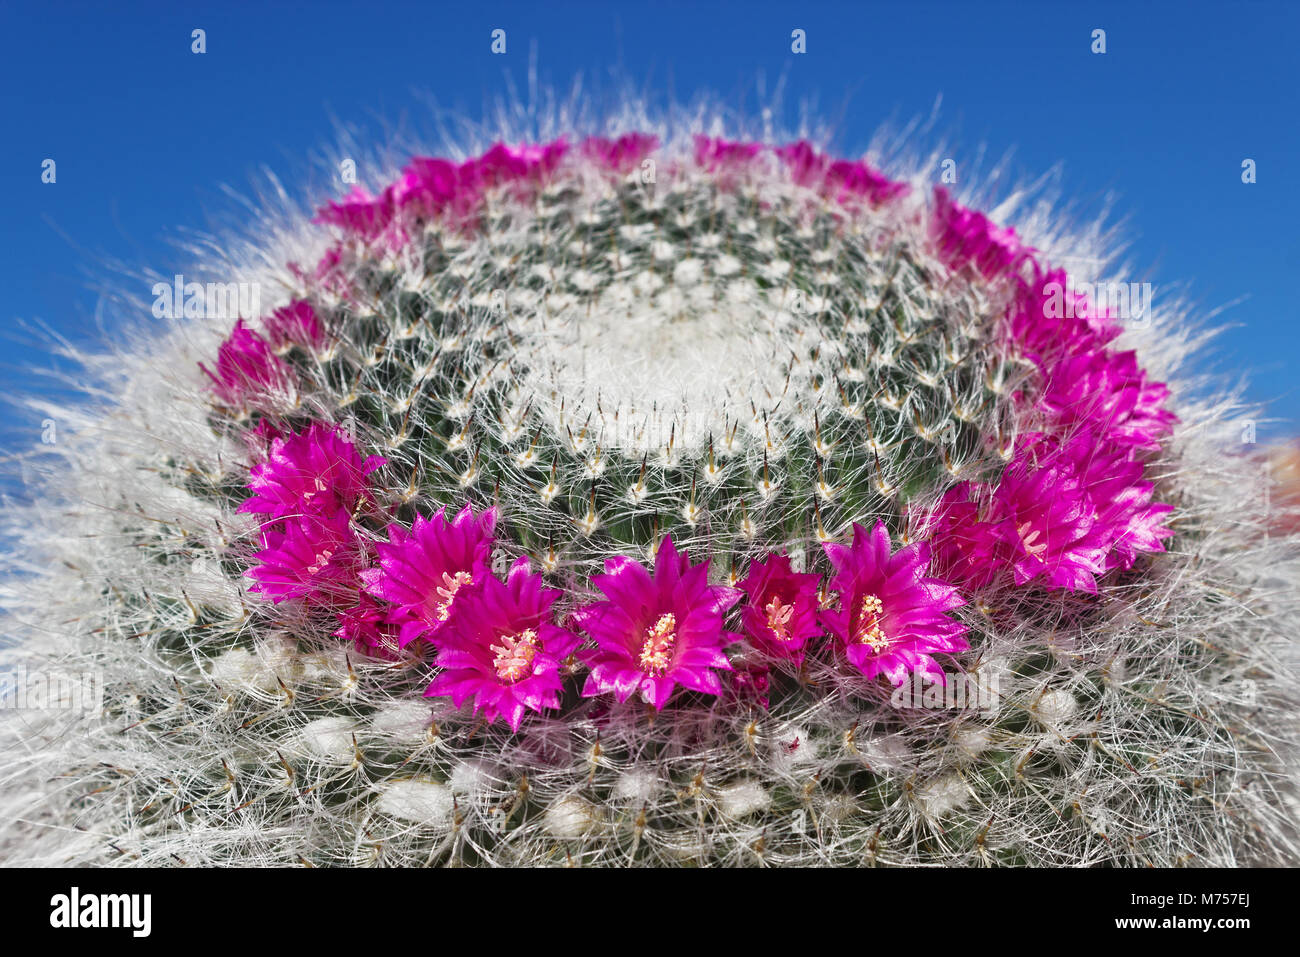 Home blooming cactus Mammillaria on blue sky background Stock Photo